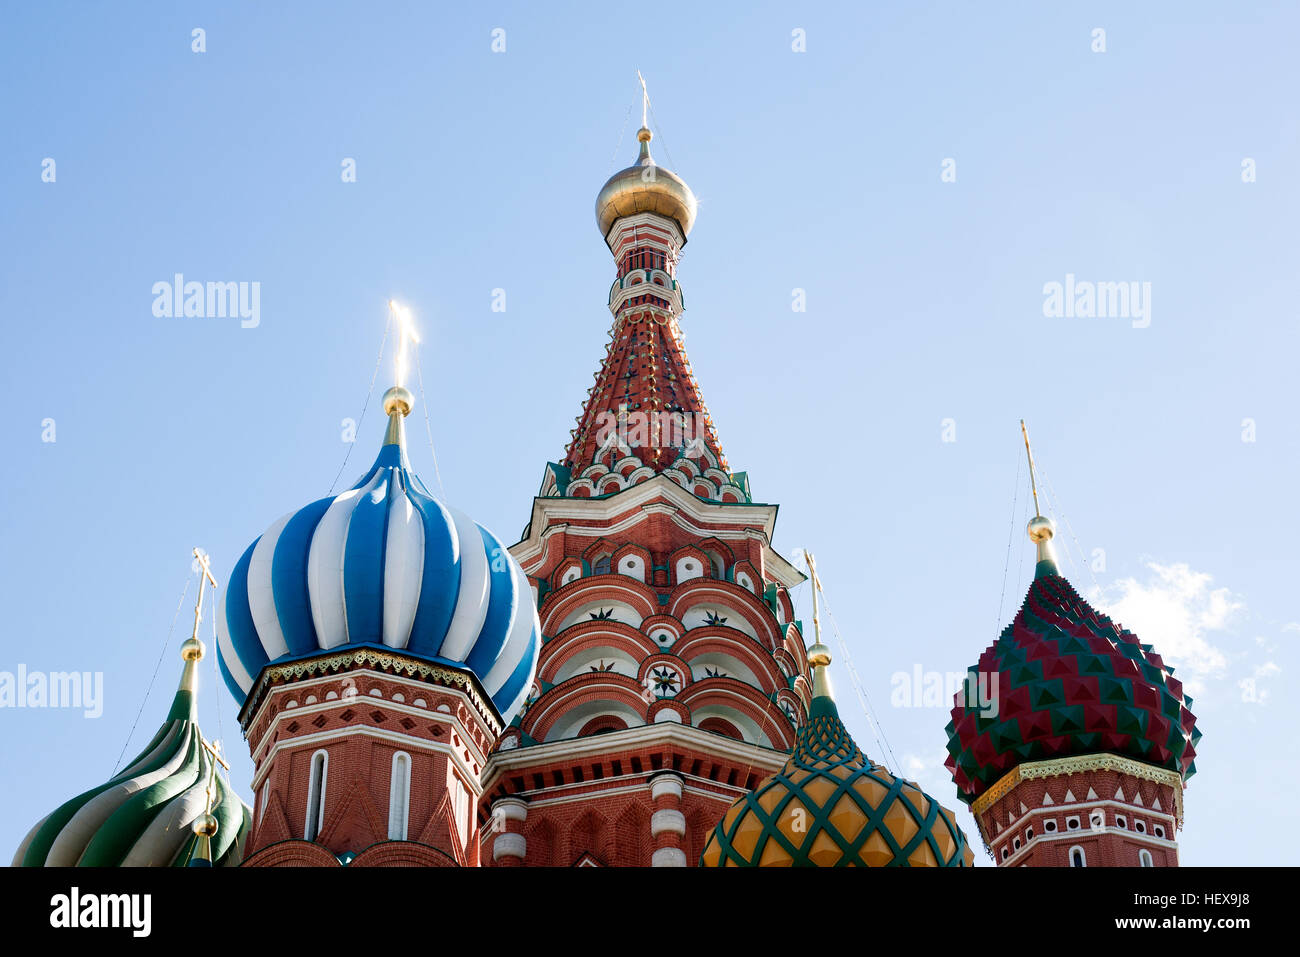 Colourful onion domes on St Basil's cathedral, Moscow, Russia Stock Photo